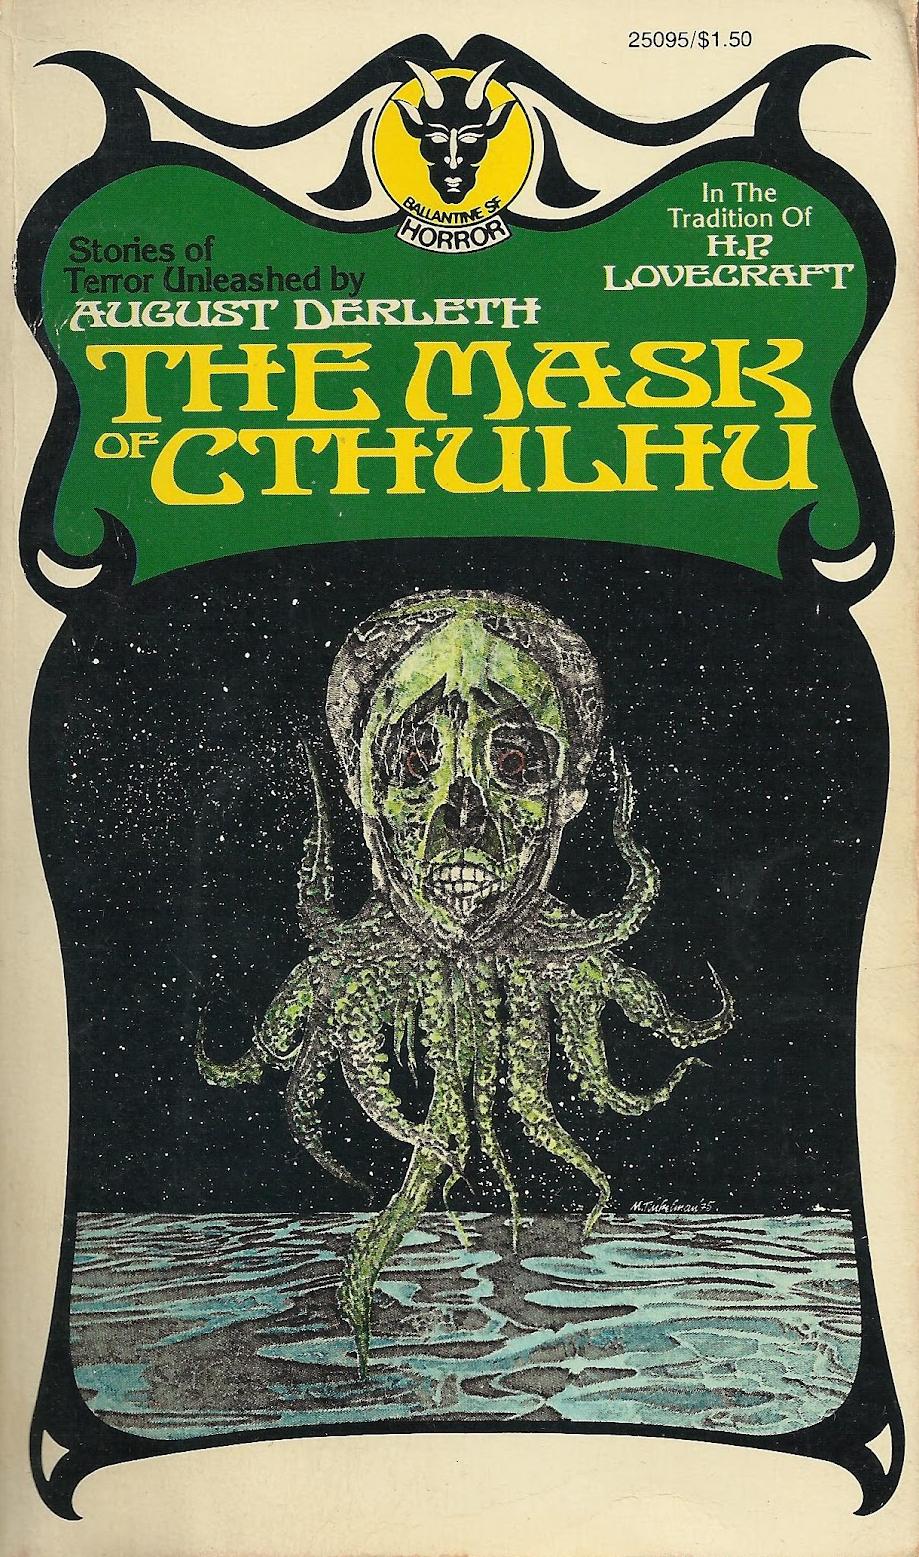 Murray Tinkelman - Cover for "The Mask Of Cthulhu"